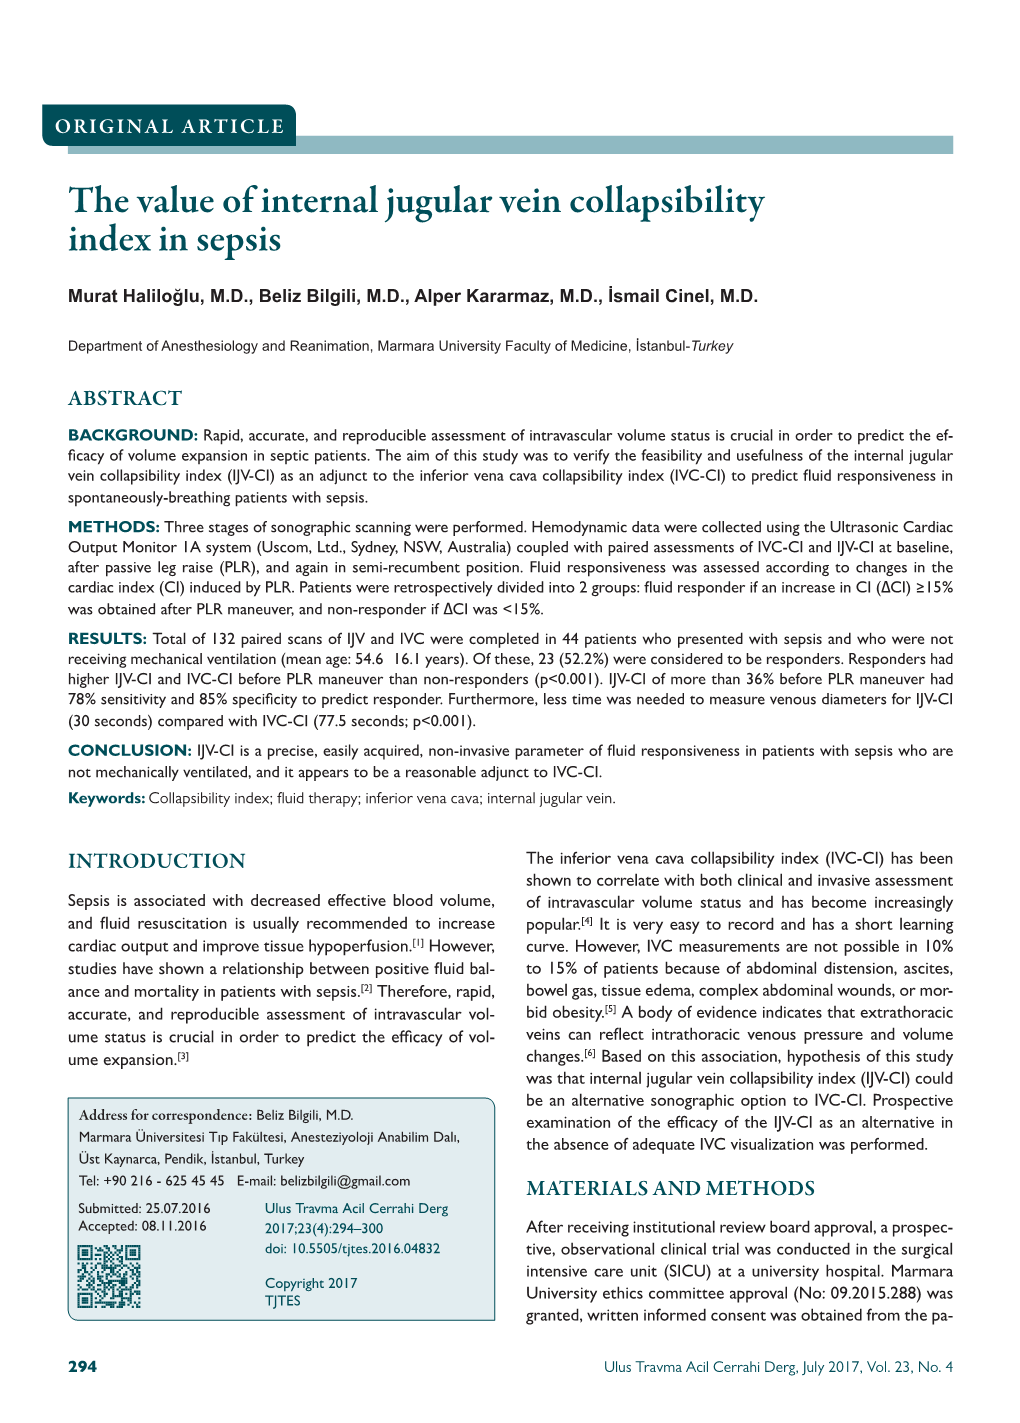 The Value of Internal Jugular Vein Collapsibility Index in Sepsis